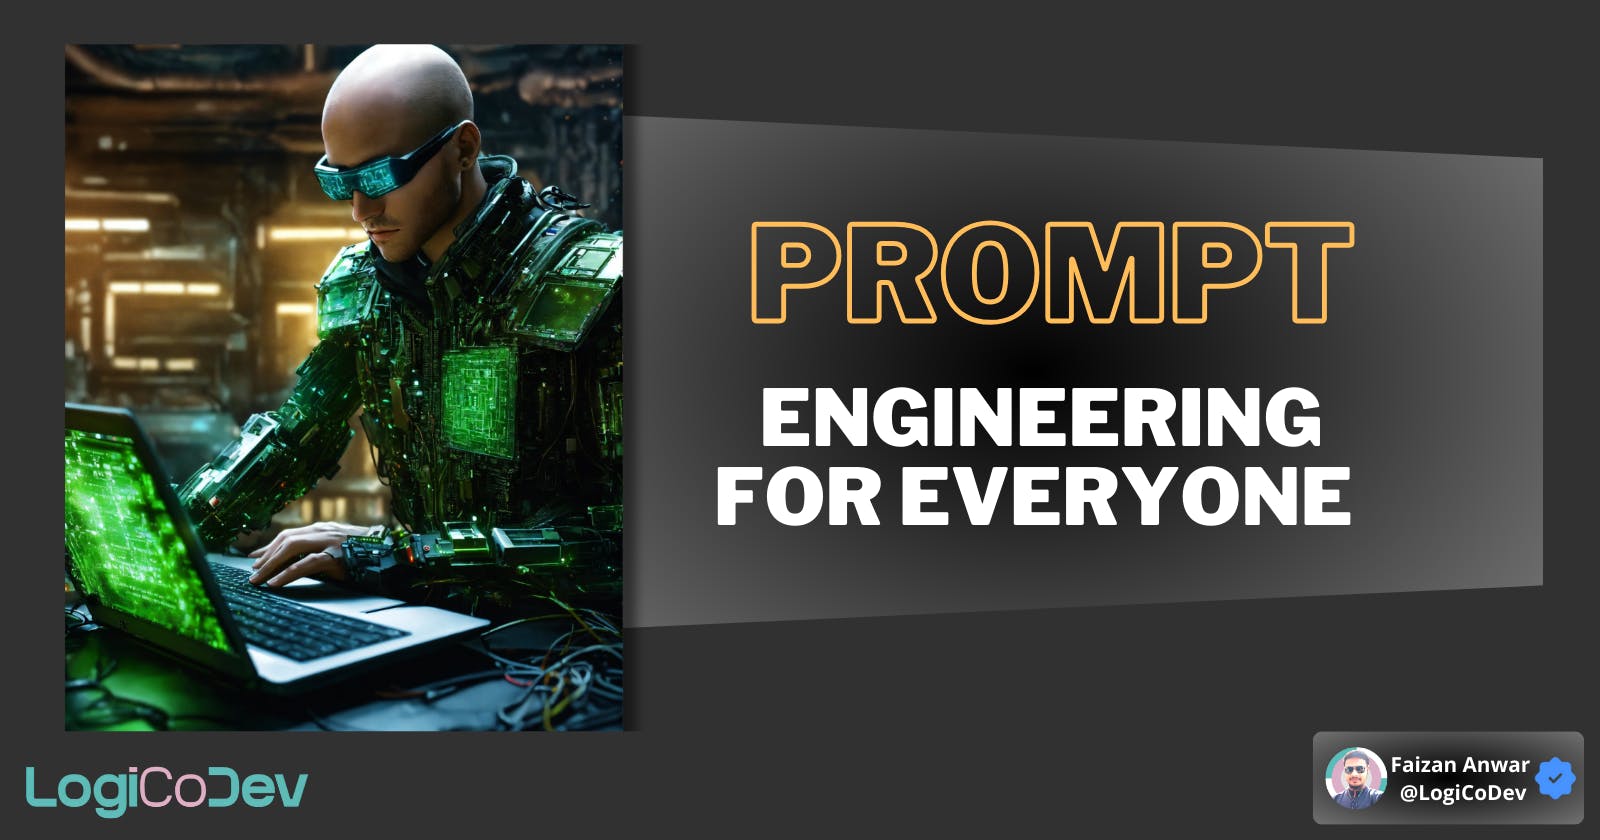 Prompt Engineering for Everyone